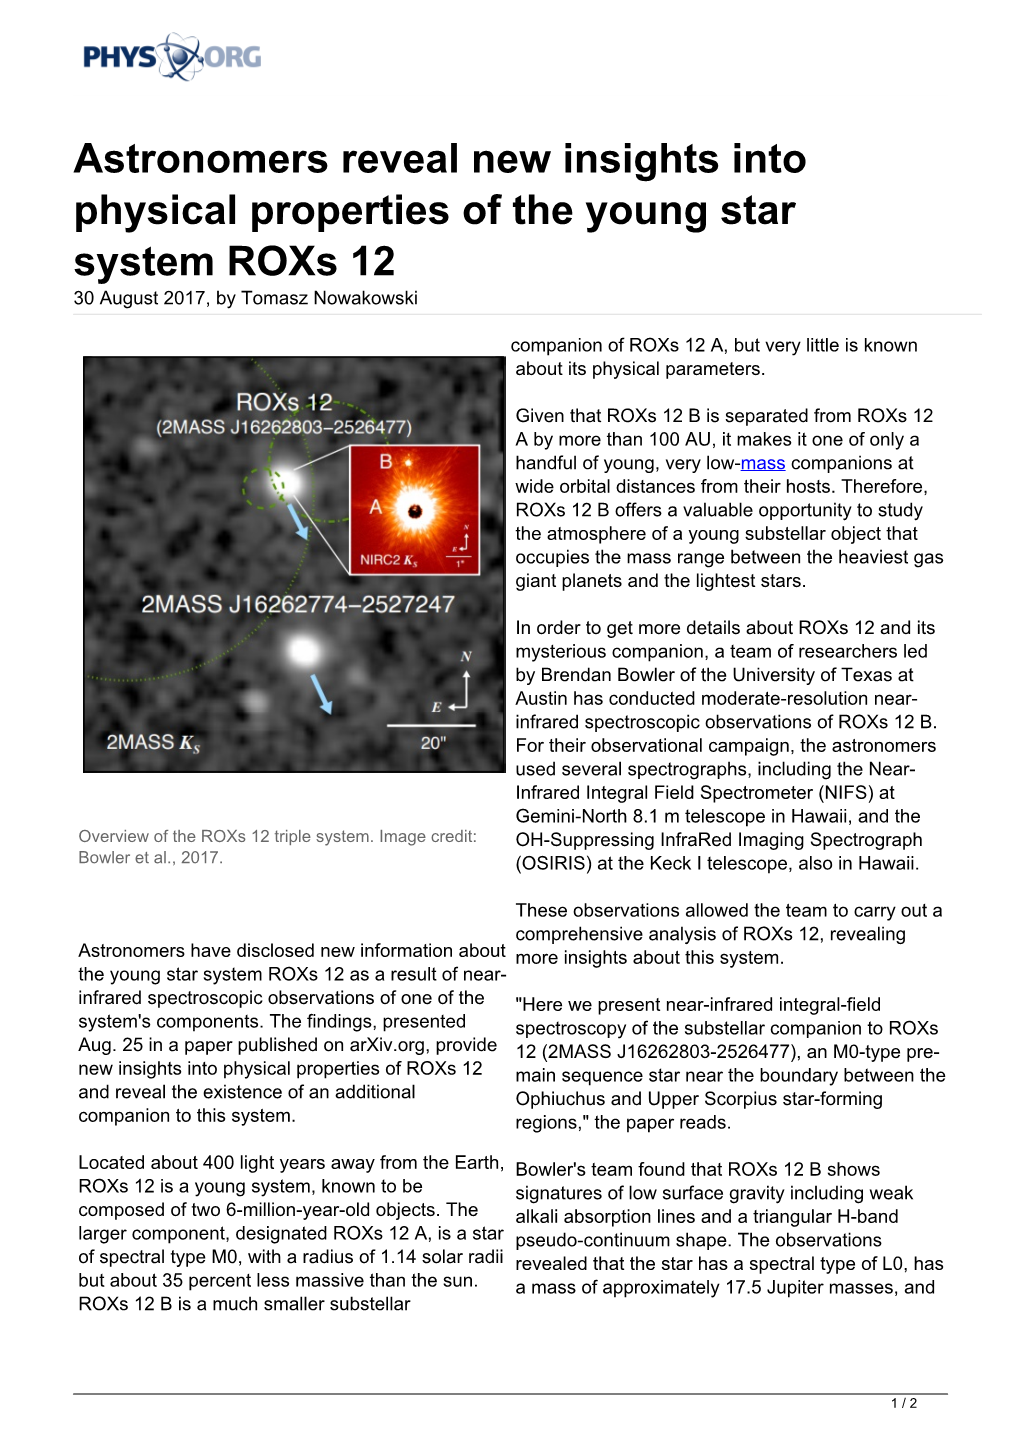 Astronomers Reveal New Insights Into Physical Properties of the Young Star System Roxs 12 30 August 2017, by Tomasz Nowakowski